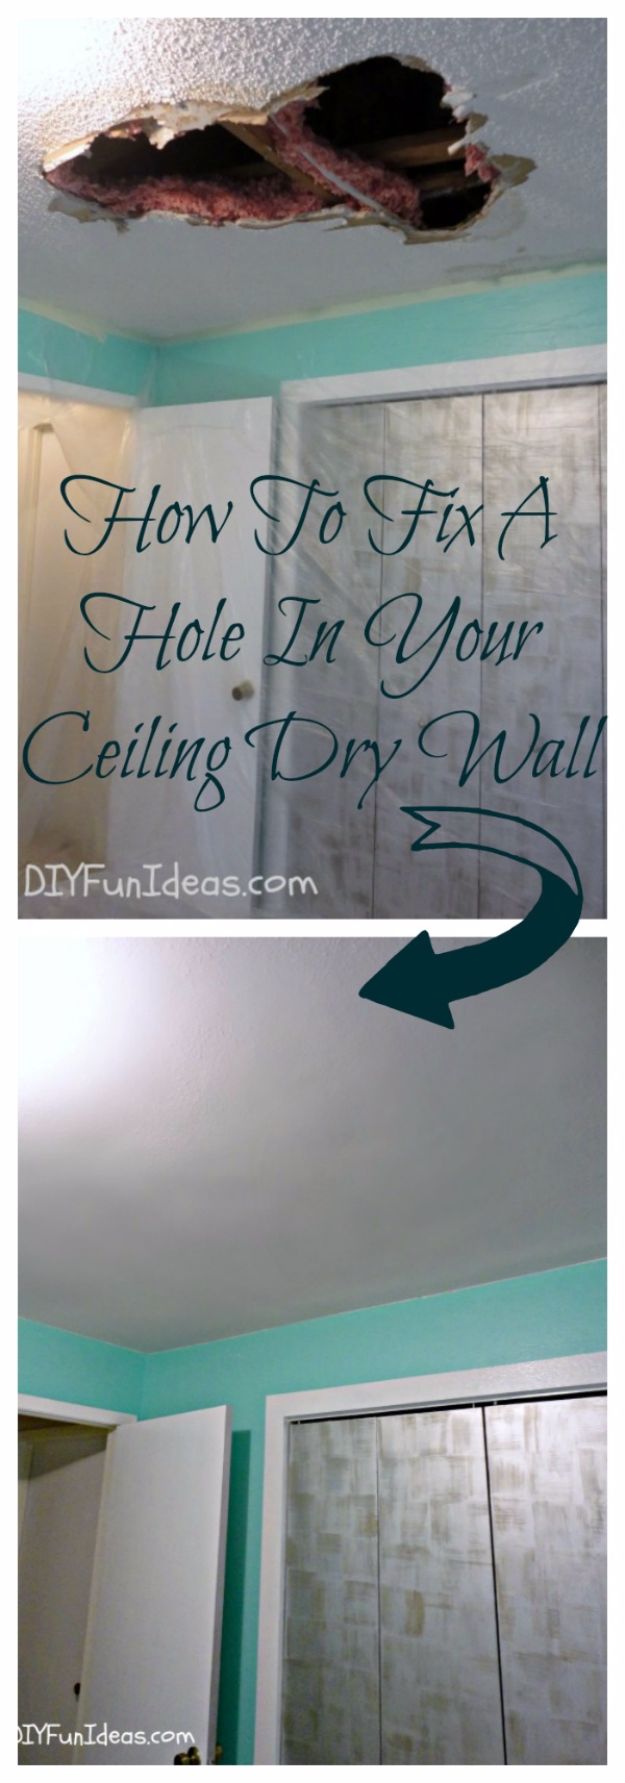 Easy Home Repair Hacks - Fix A Hole In Your Ceiling Dry Wall - Quick Ways To Fix Your Home With Cheap and Fast DIY Projects - Step by step Tutorials, Good Ideas for Renovating, Simple Tips and Tricks for Home Improvement on A Budget #diy #homeimprovement